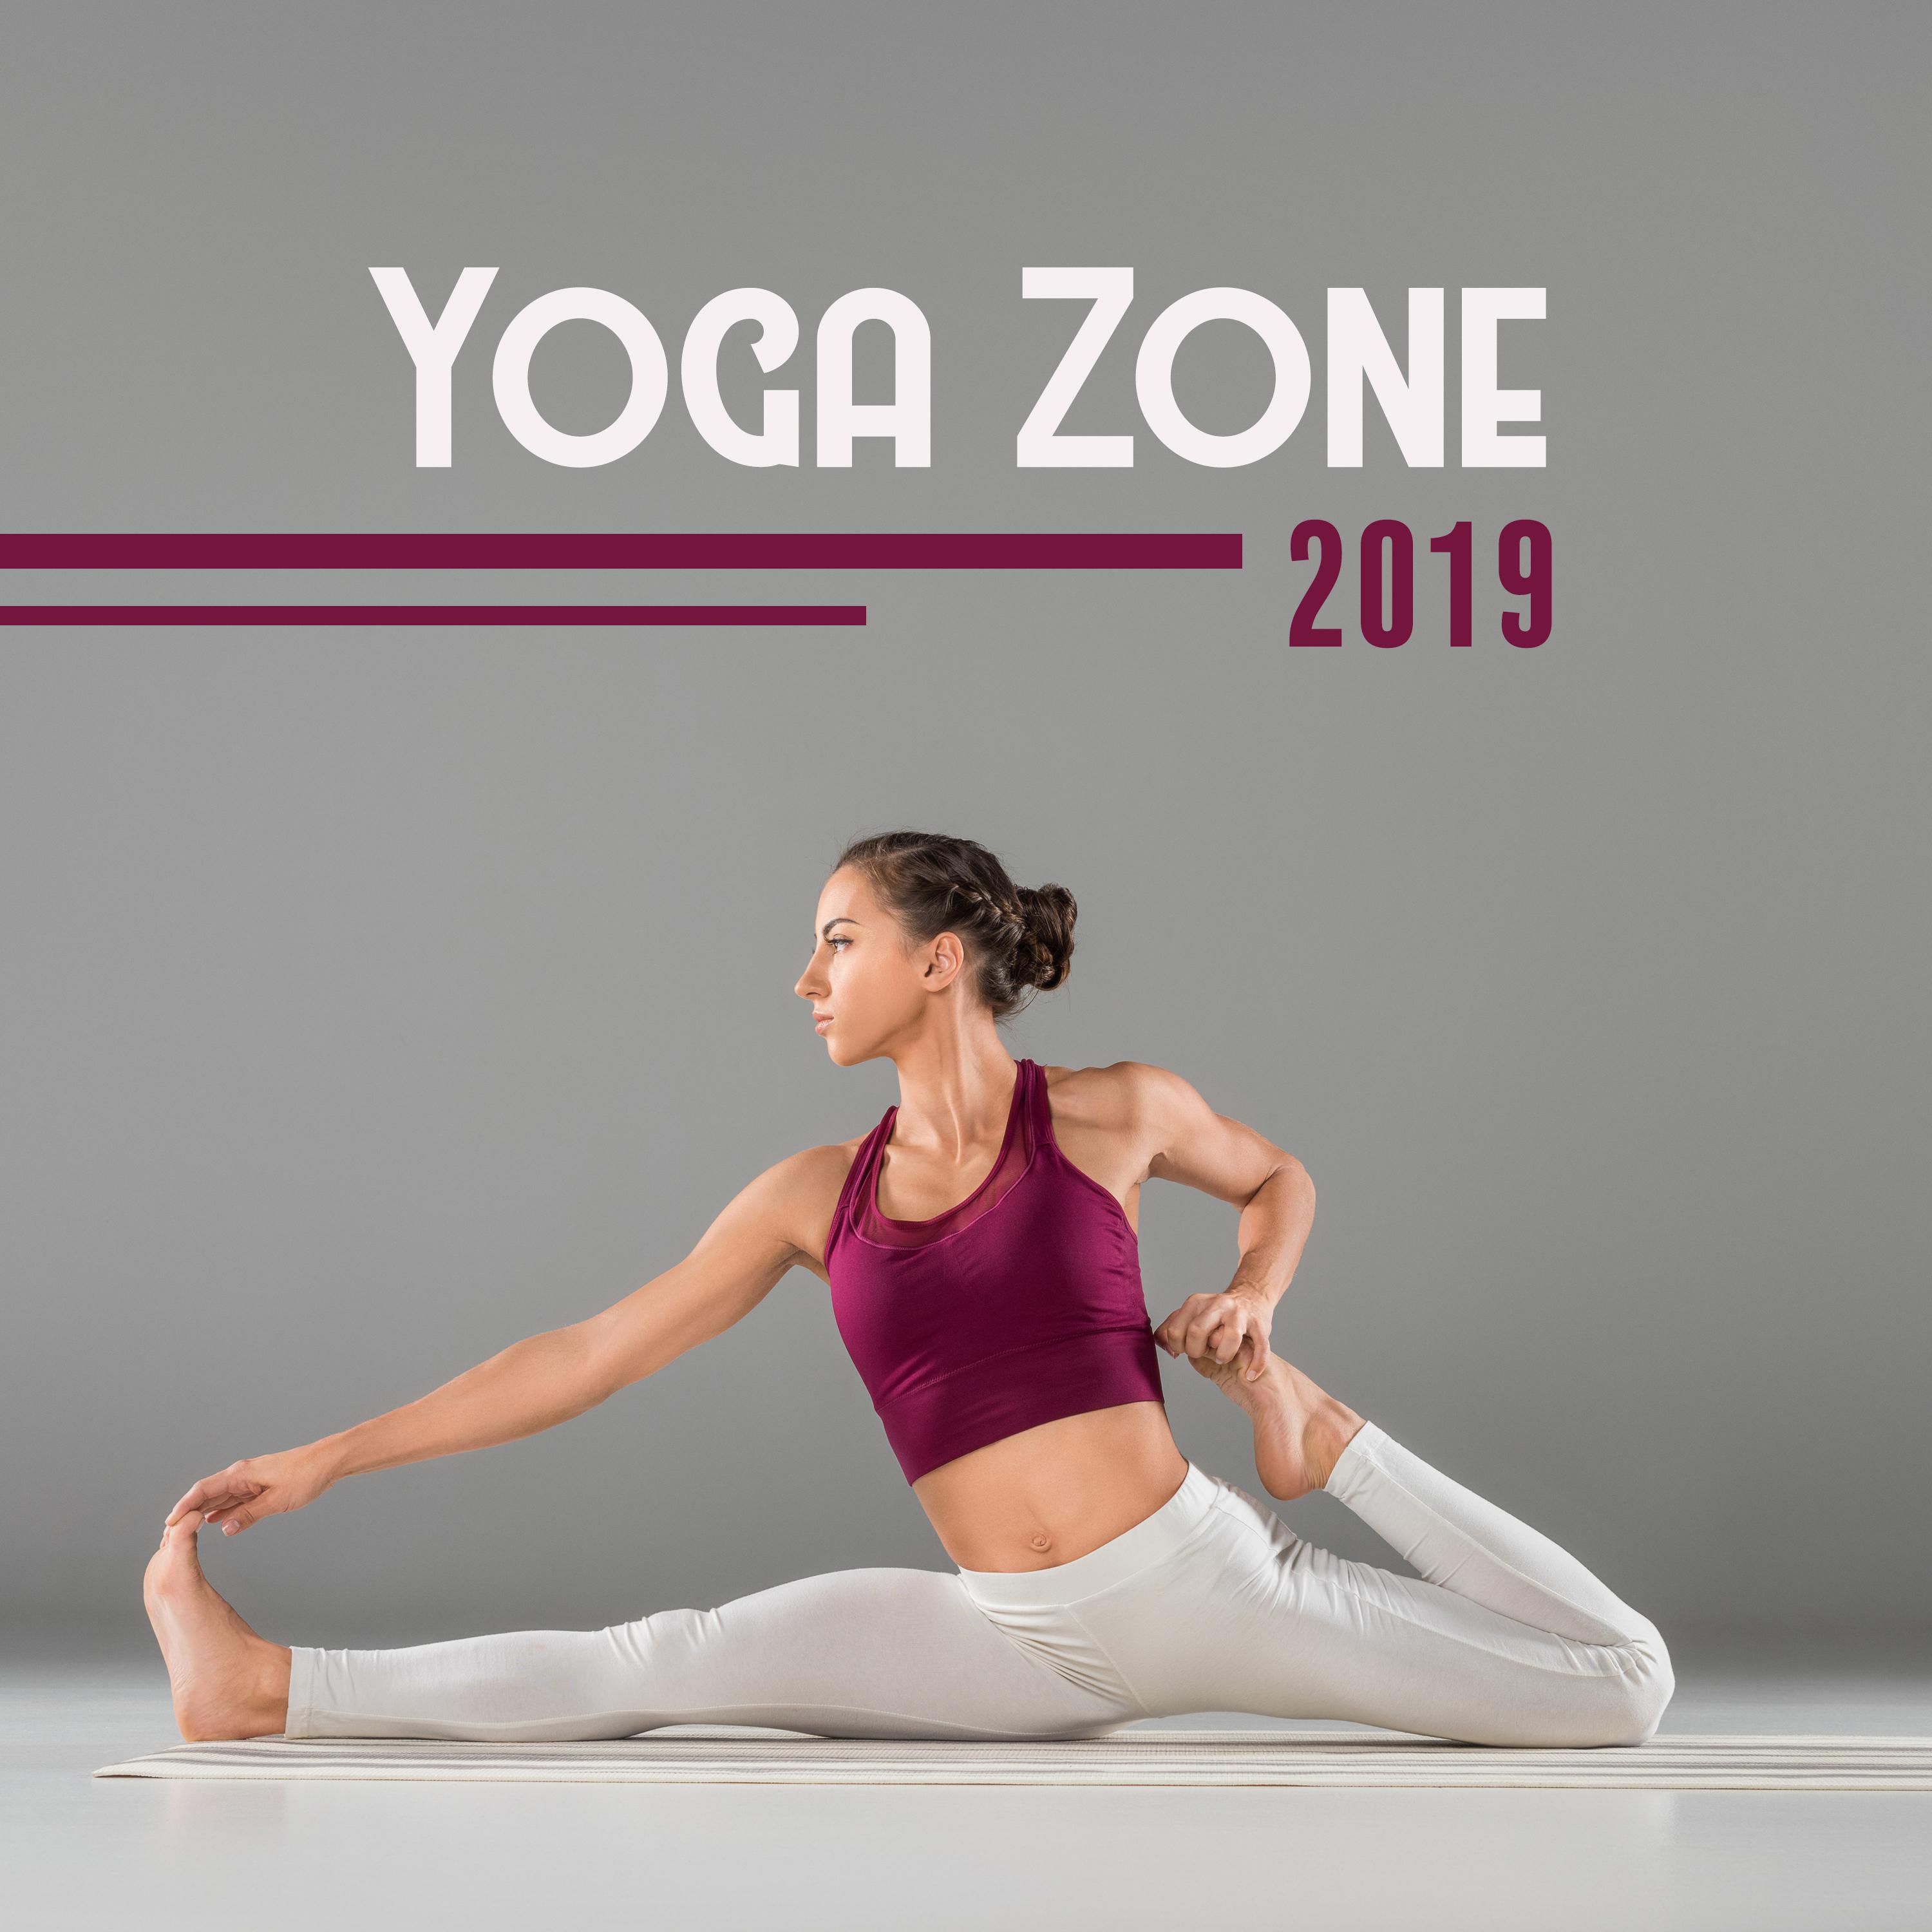 Yoga Zone 2019  Meditation Therapy to Calm Down, Ambient Yoga, Yoga Practice, Inner Balance, Deep Harmony, Spiritual Music to Rest